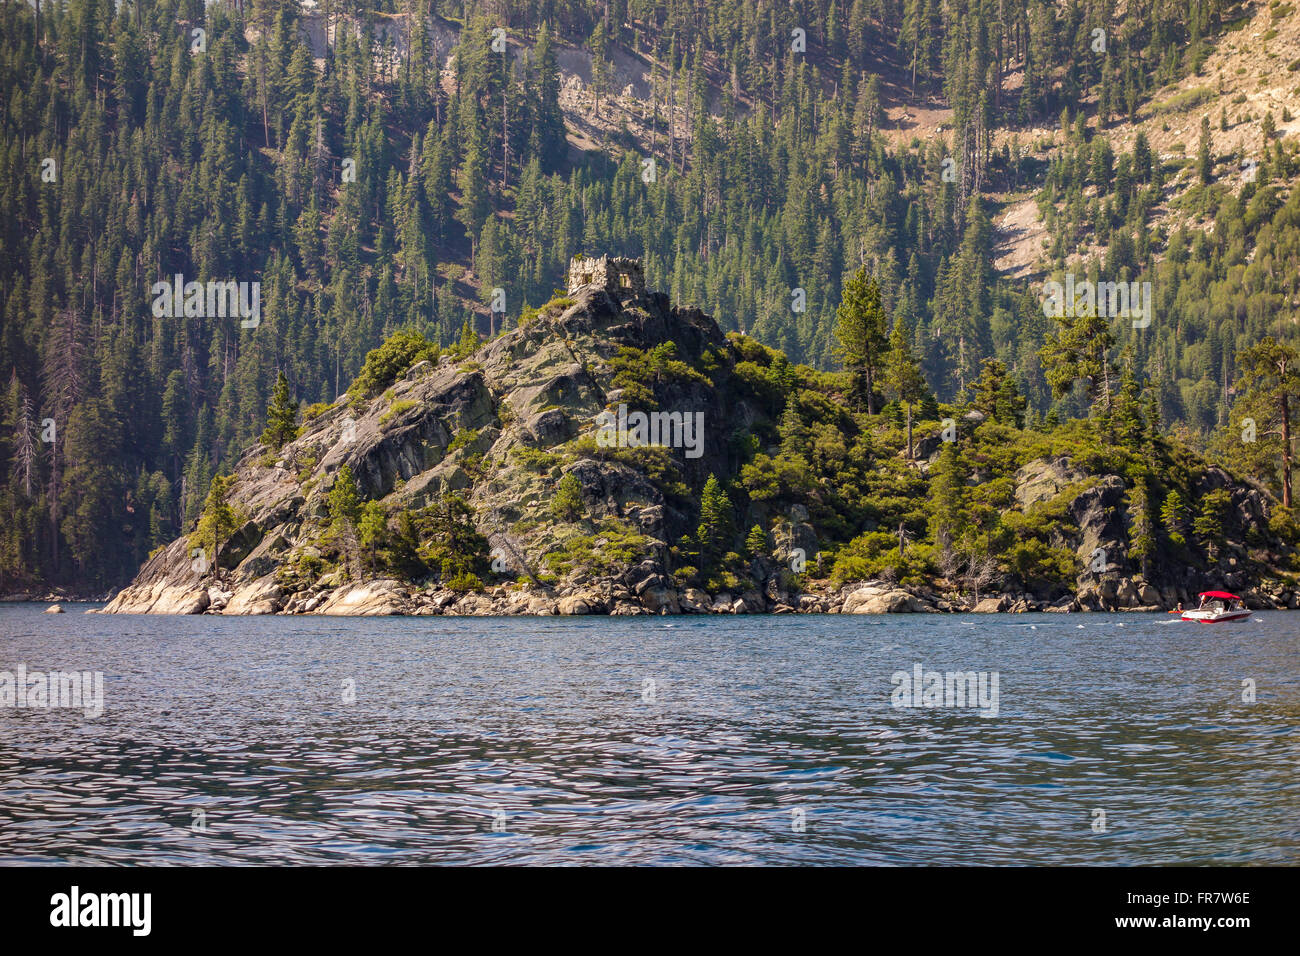 LAKE TAHOE, CALIFORNIA, USA - Emerald Bay. Old stone tea house is visible on top of island. Stock Photo